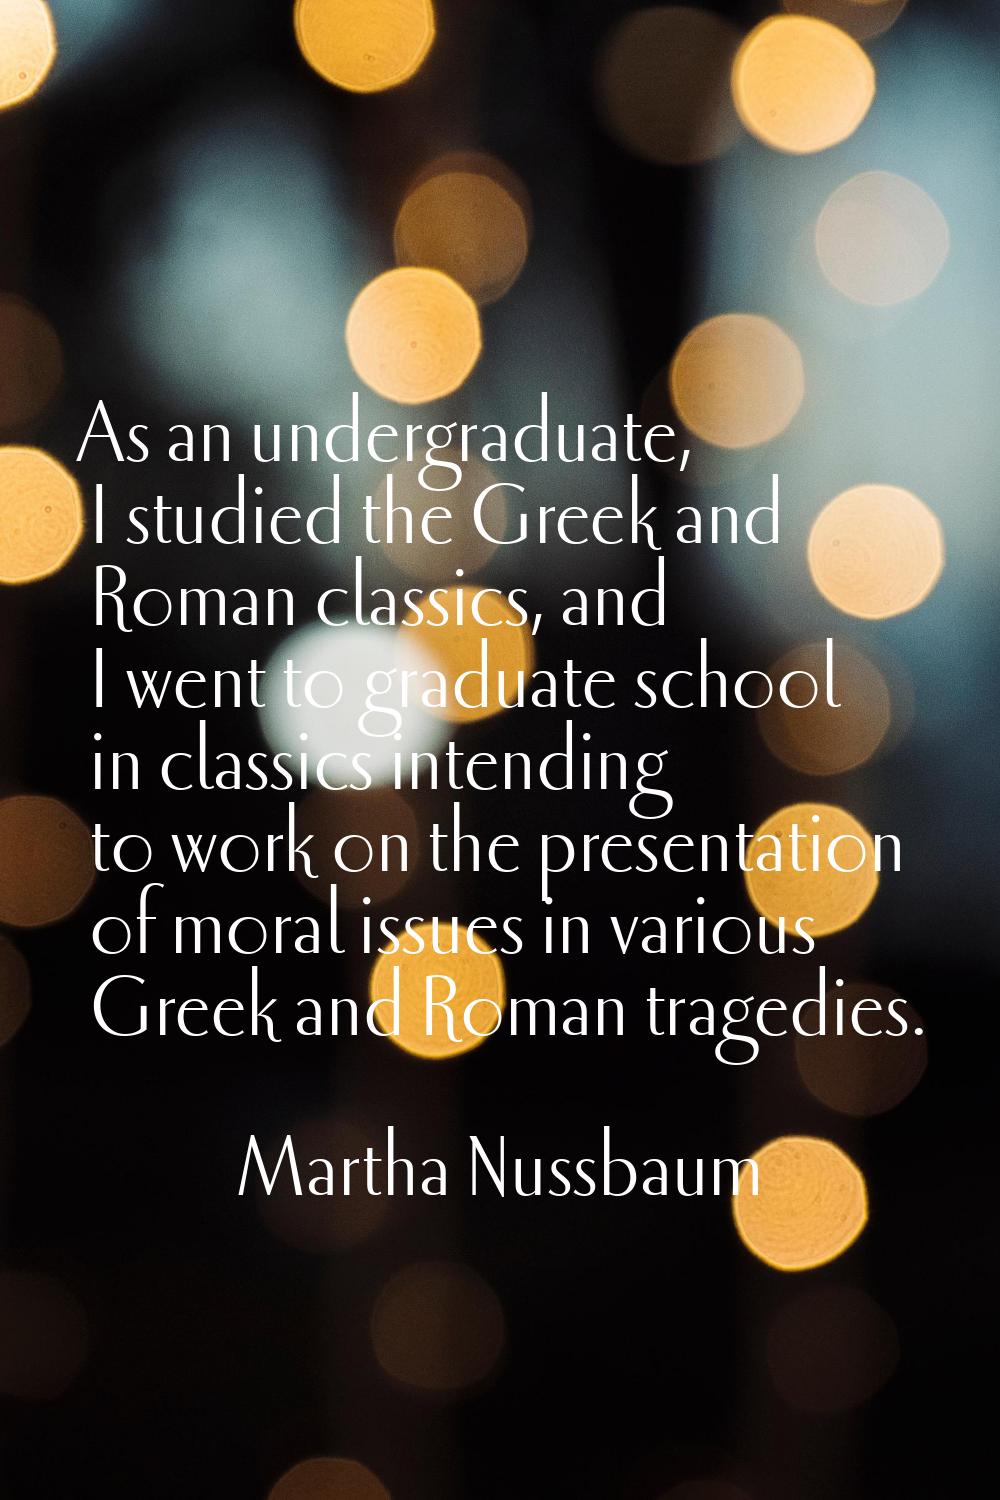 As an undergraduate, I studied the Greek and Roman classics, and I went to graduate school in class